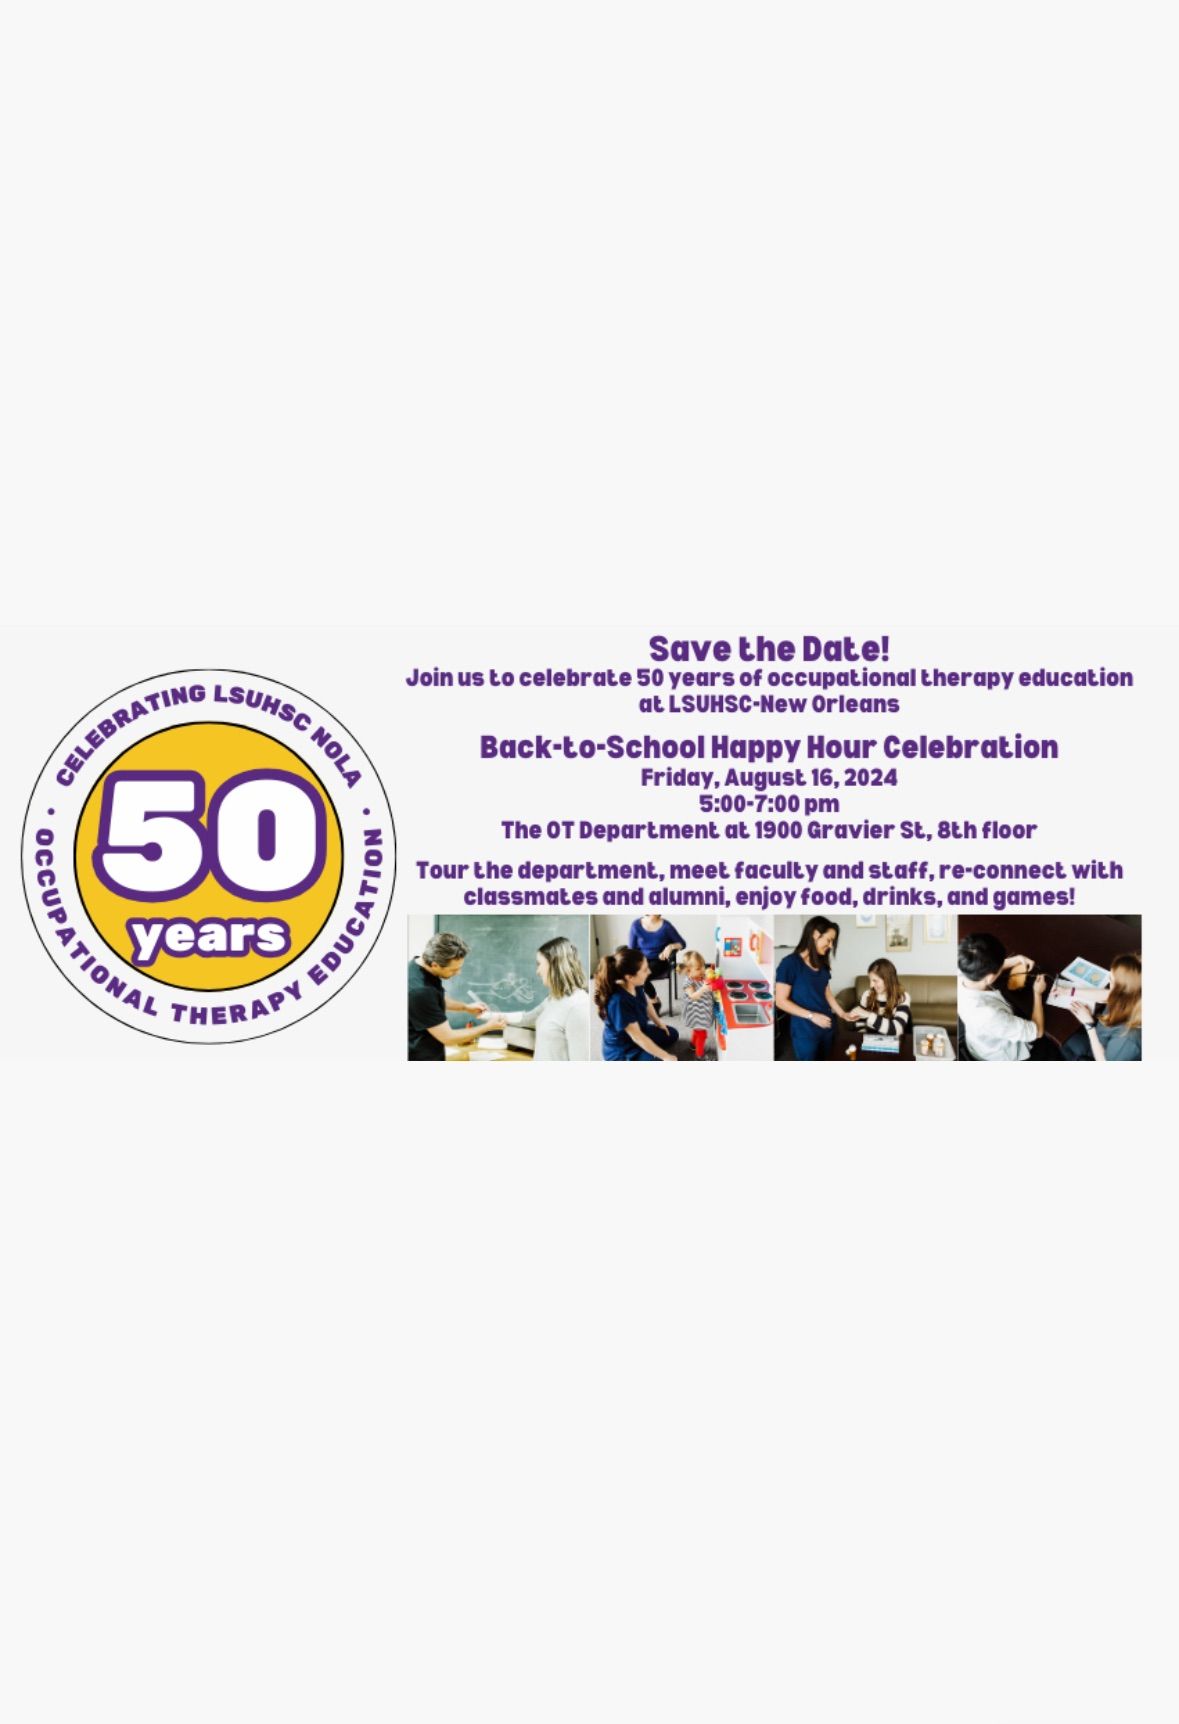 LSUHSC-New Orleans Occupational Therapy 50th Anniversary Celebration